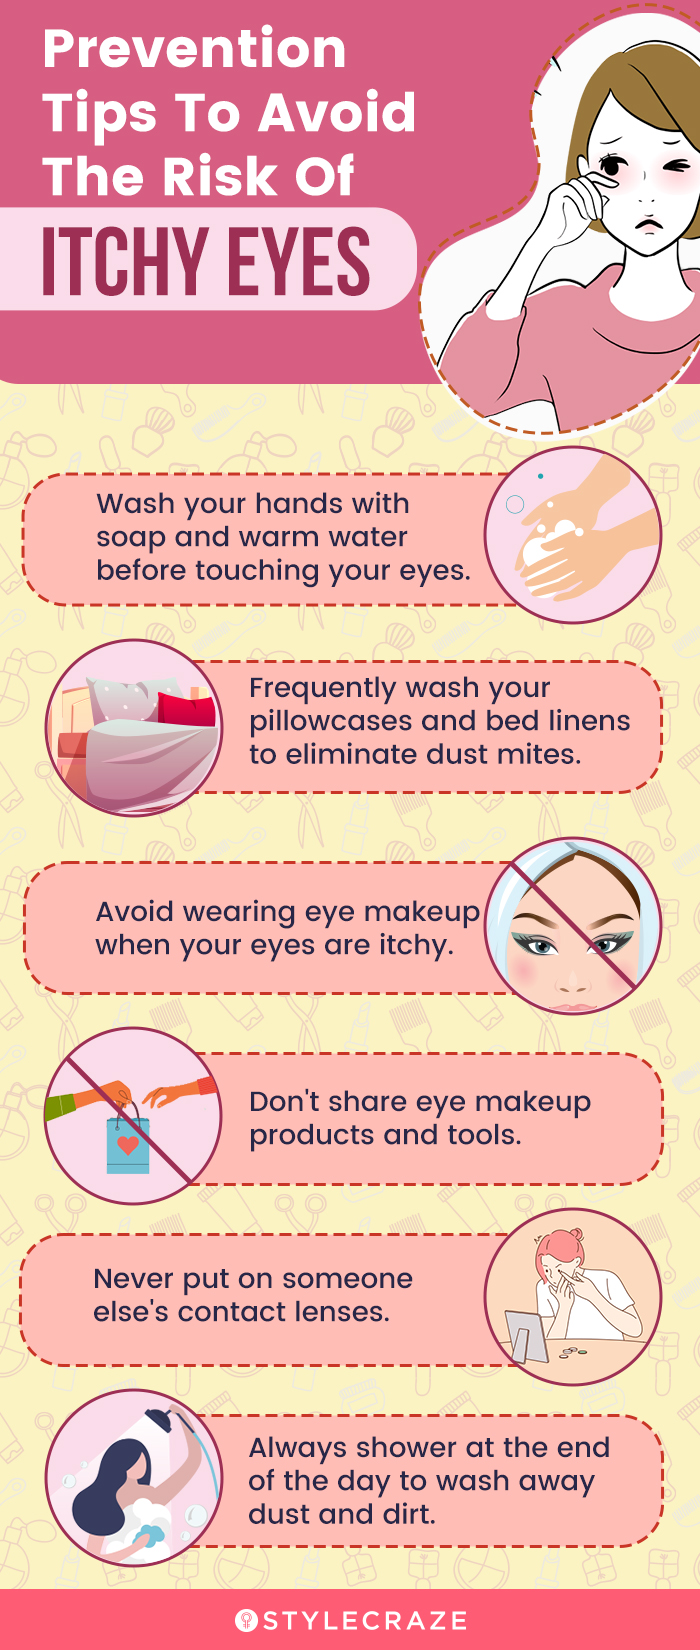 prevention tips to avoid the risk of itchy eyes [infographic]